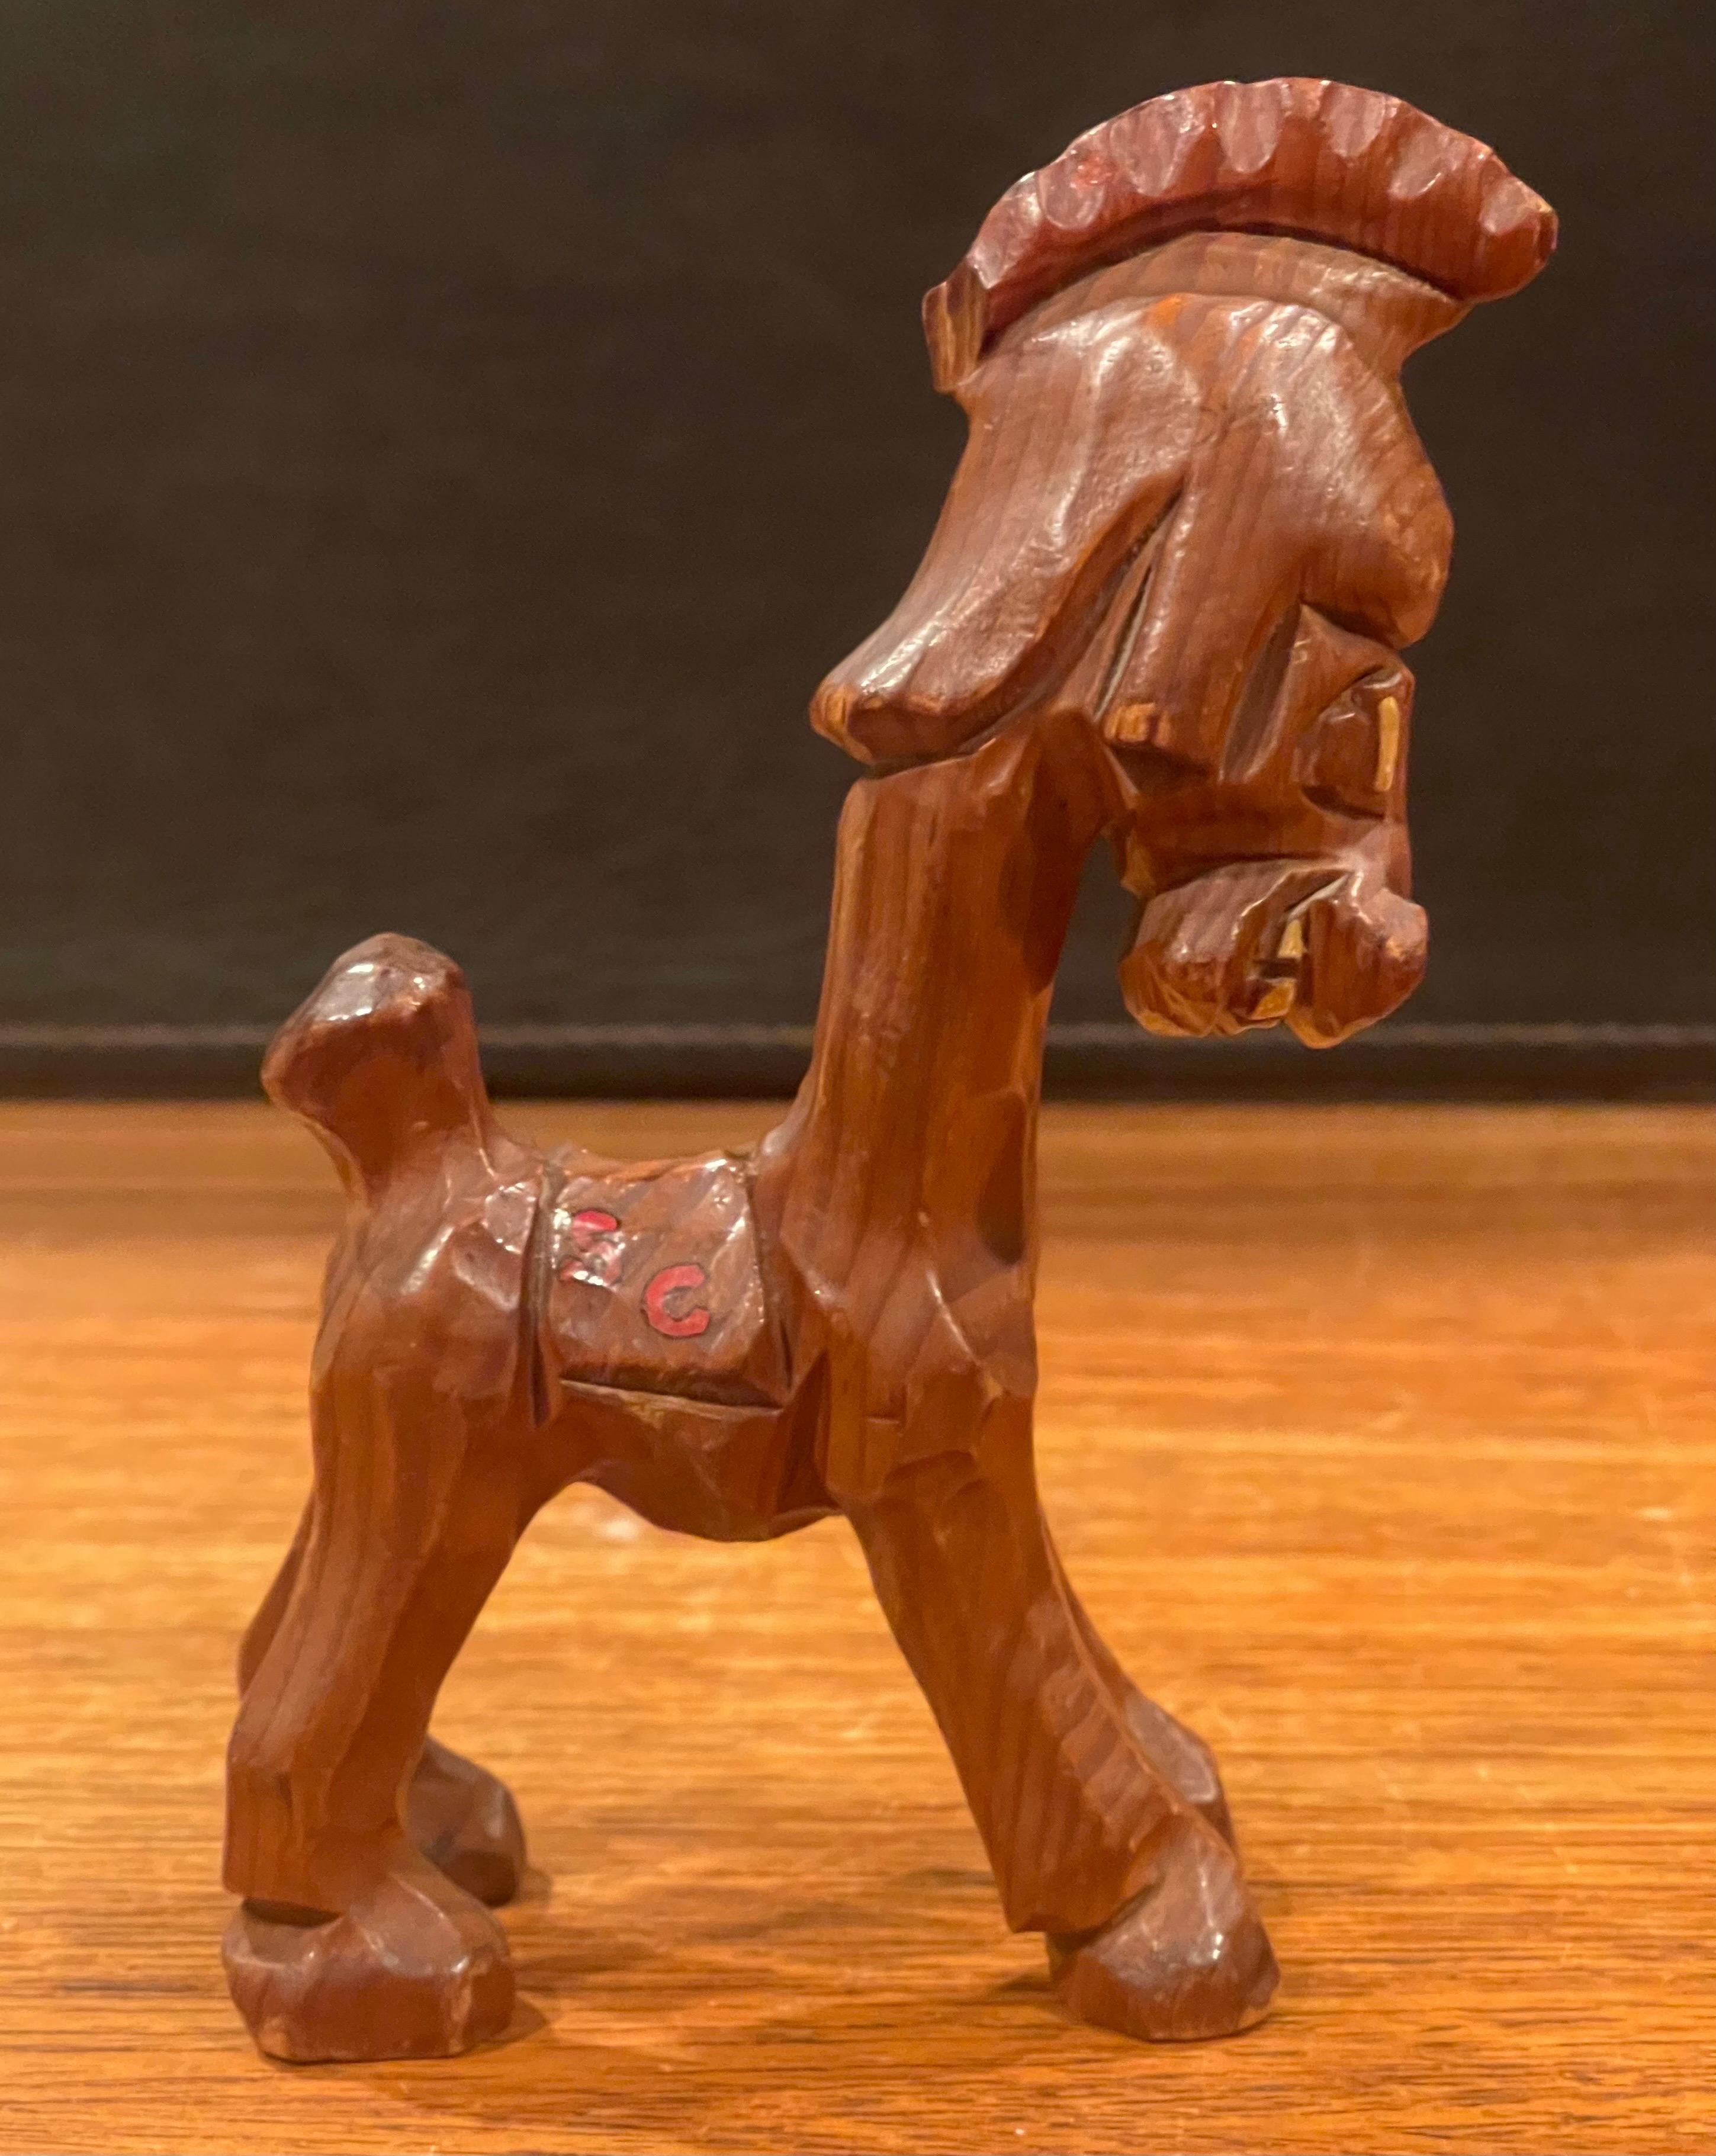 Hand-Carved University of Southern California Traveler Mascot Wood Carving by Carter Hoffman For Sale